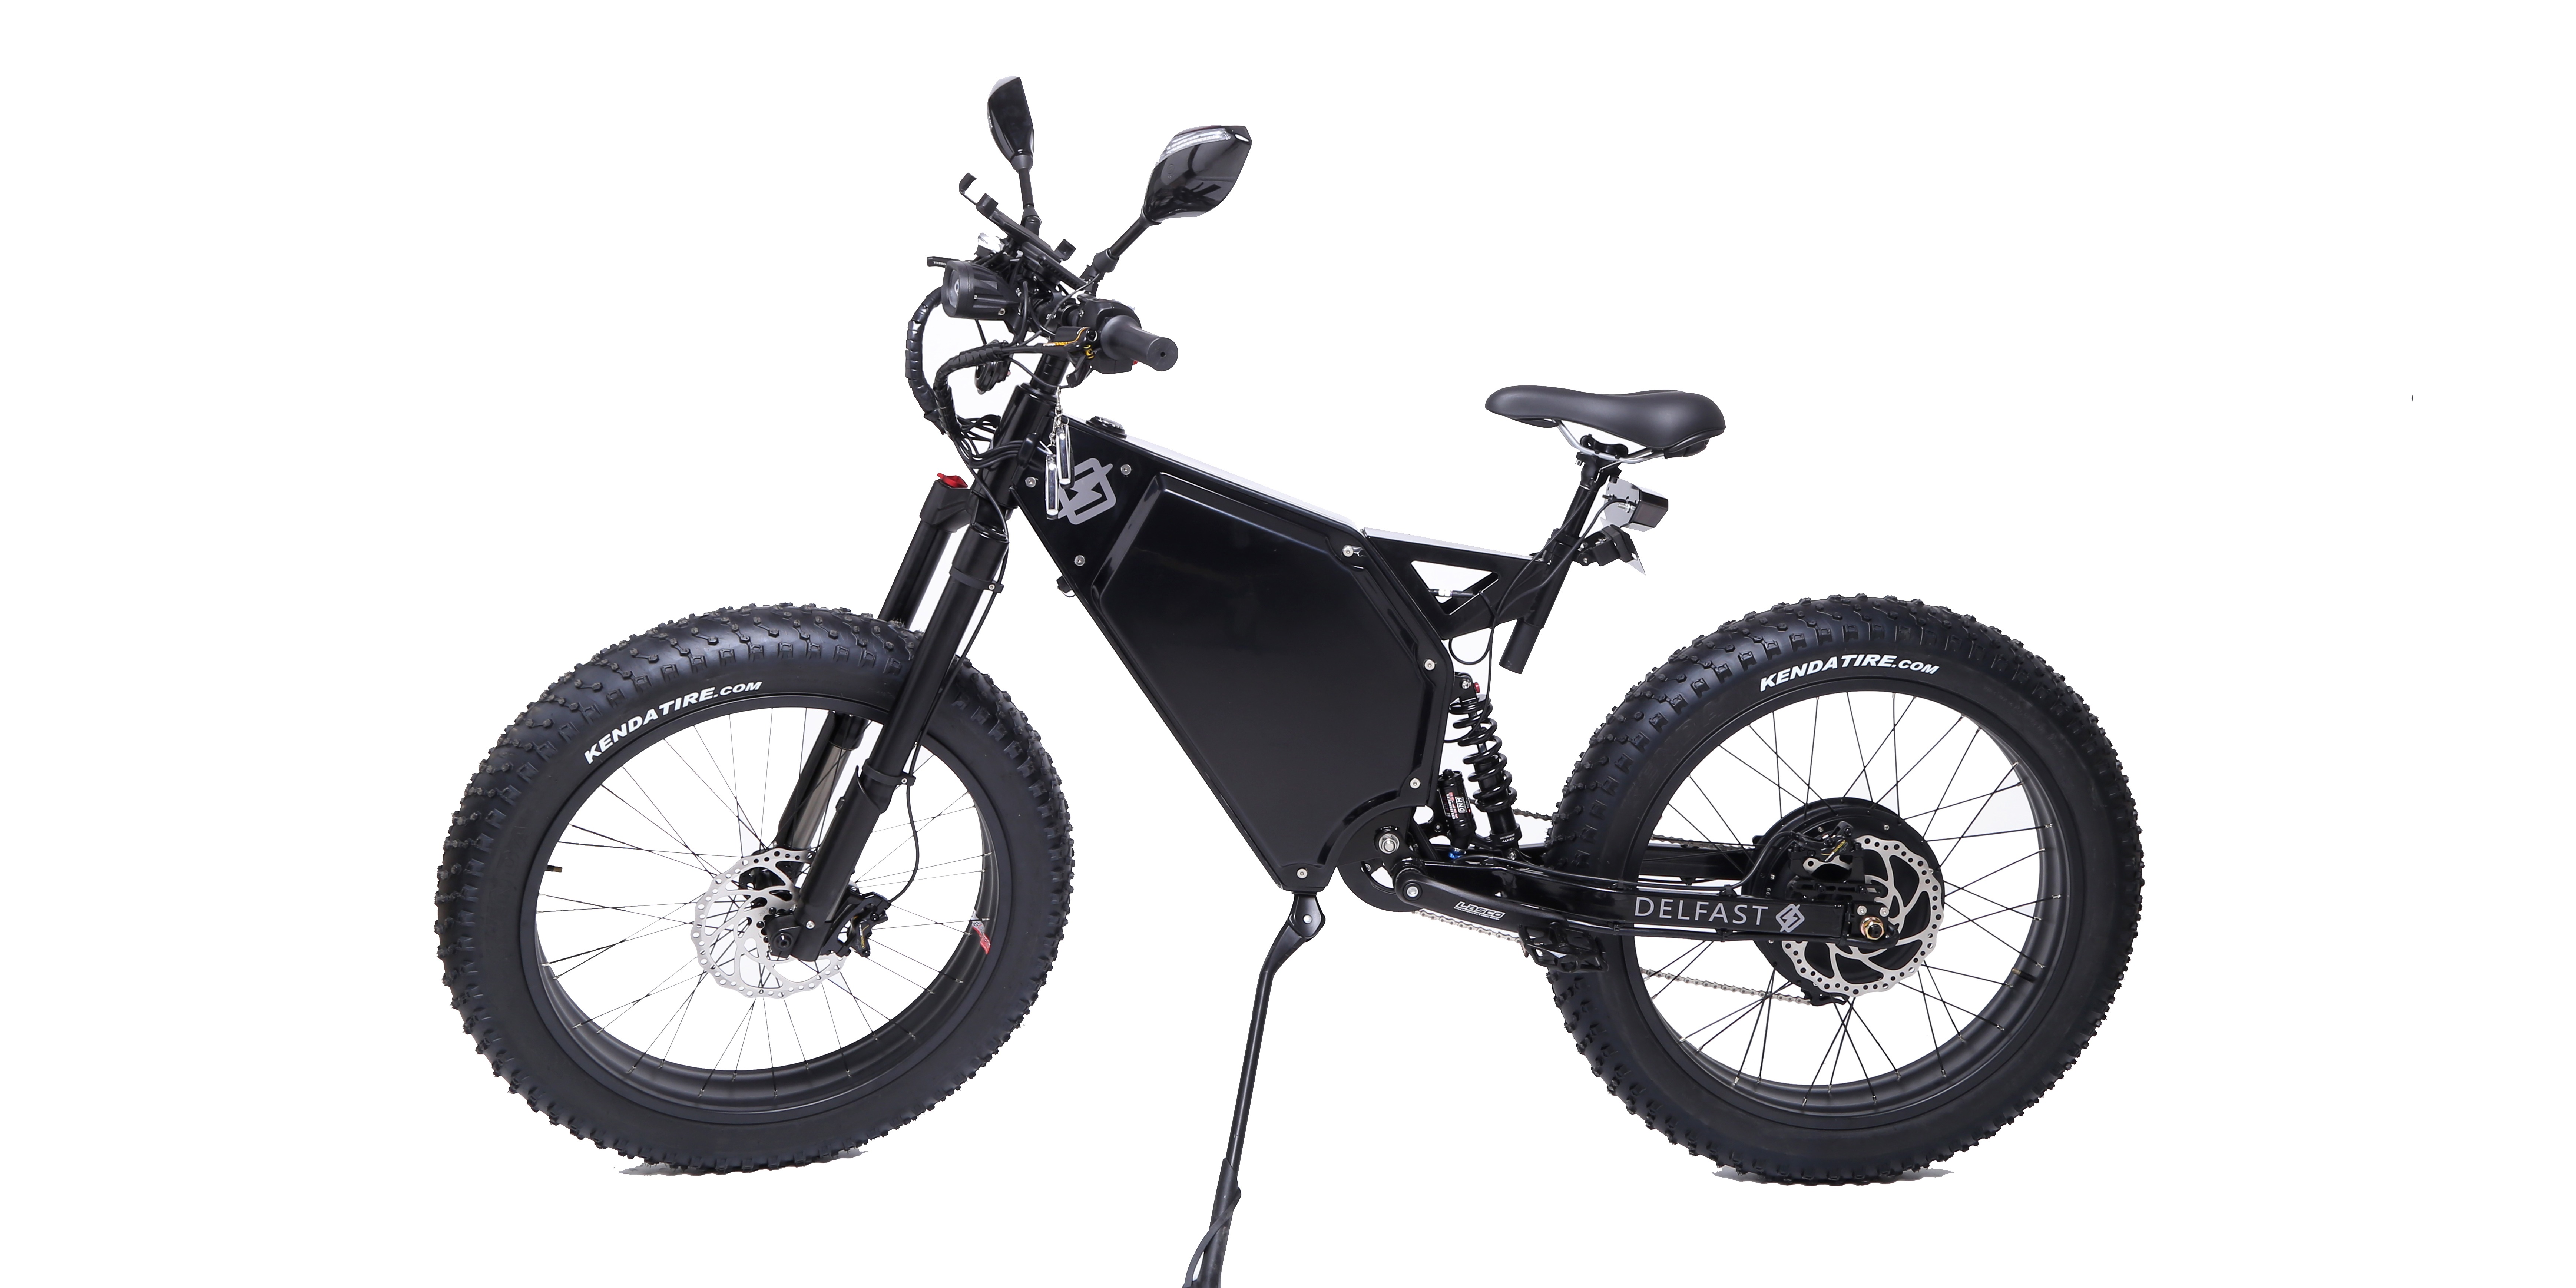 electric hunting bike for sale